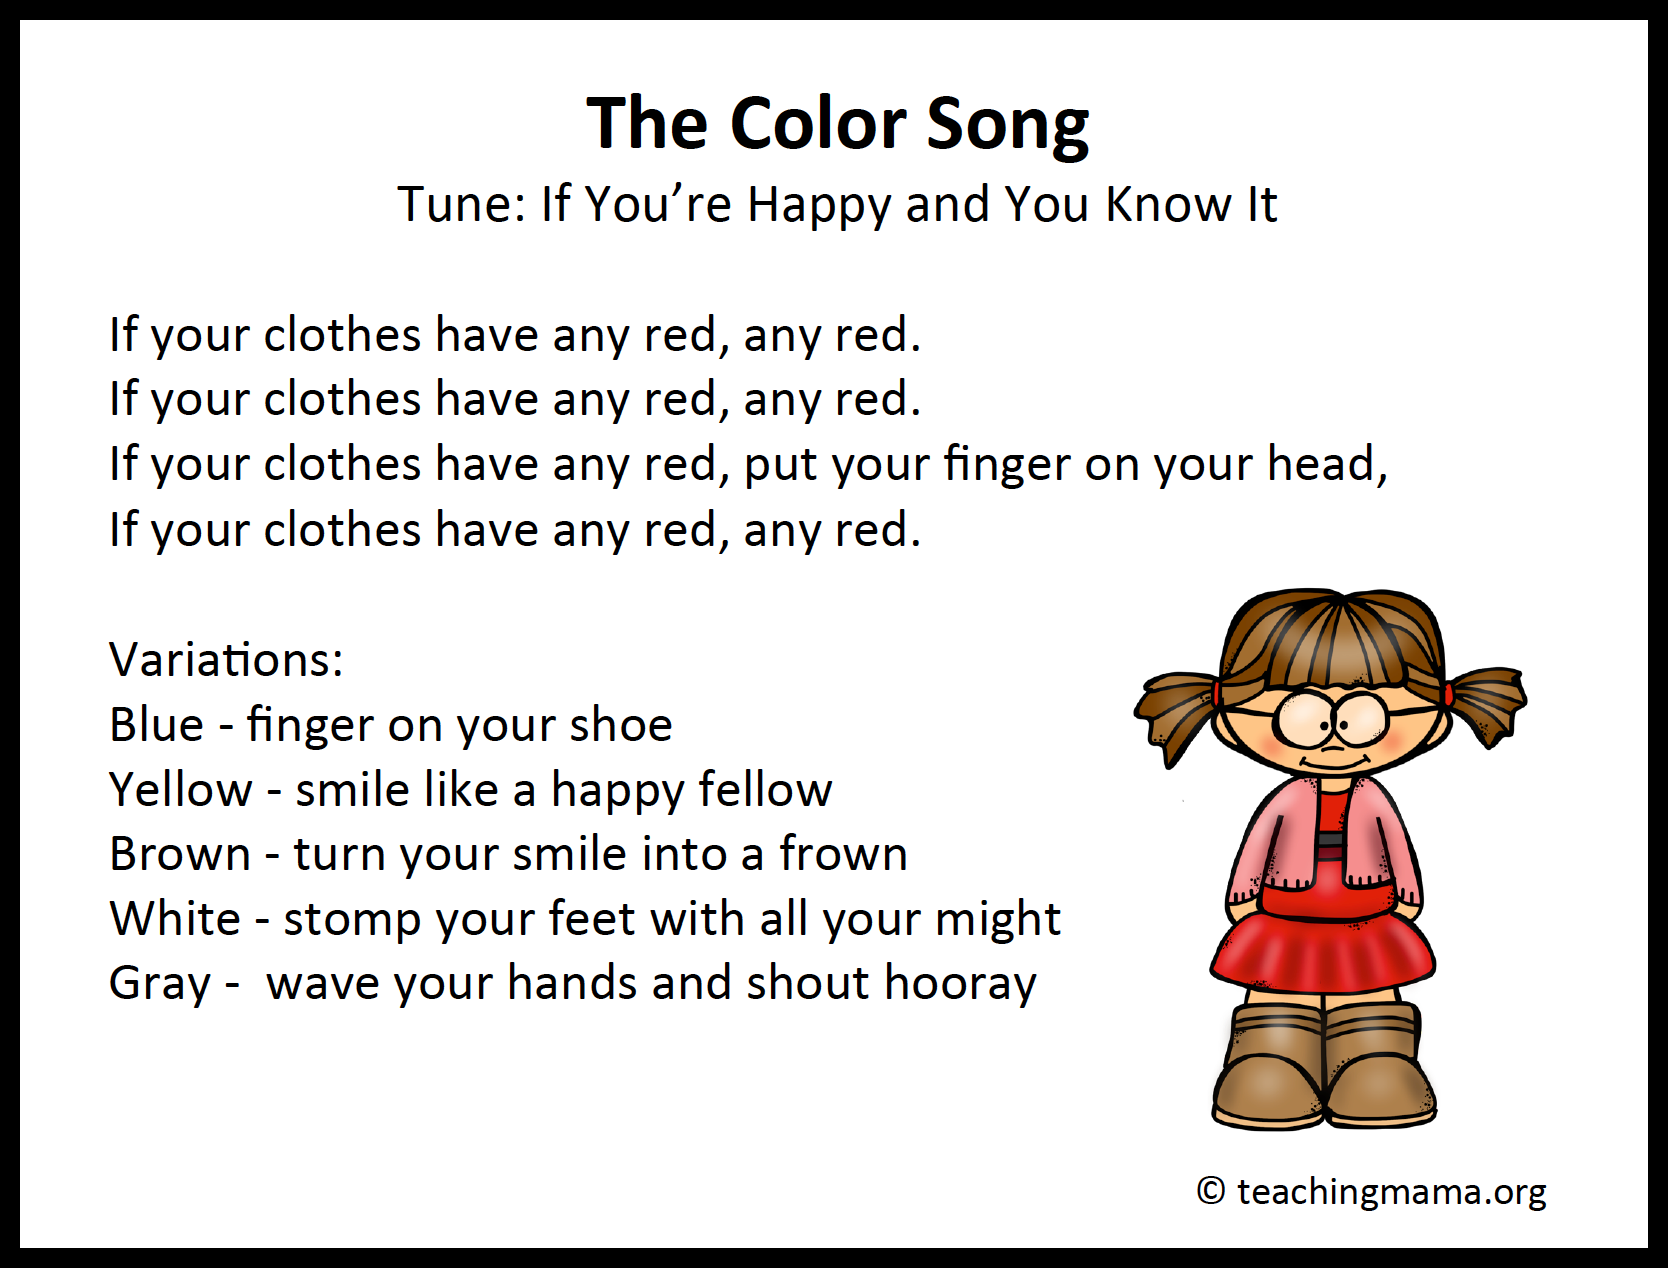 The color song